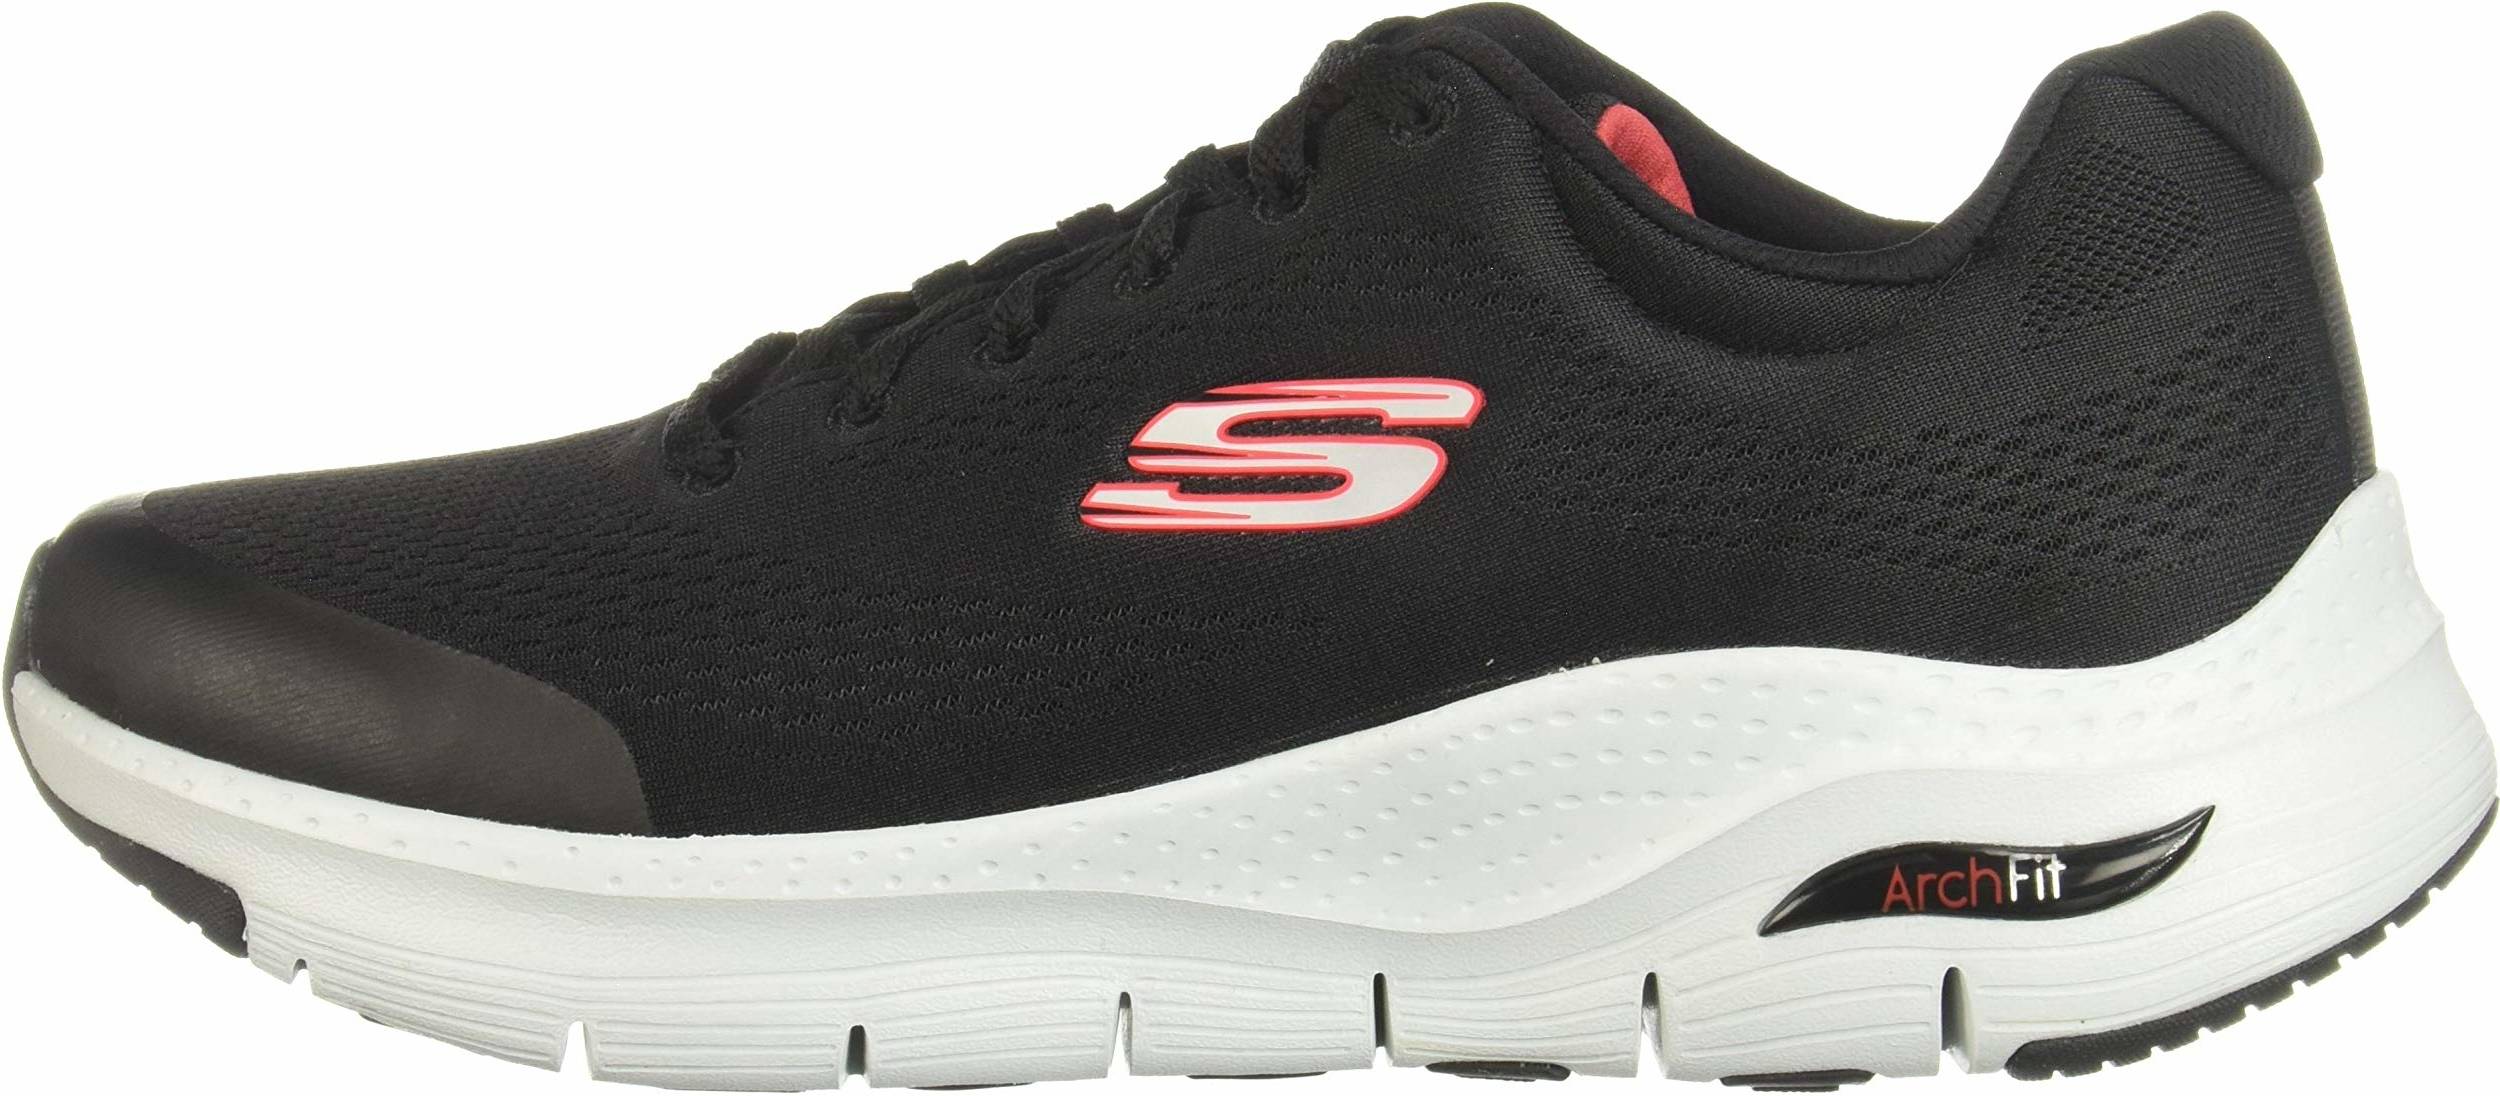 skechers mens shoes red